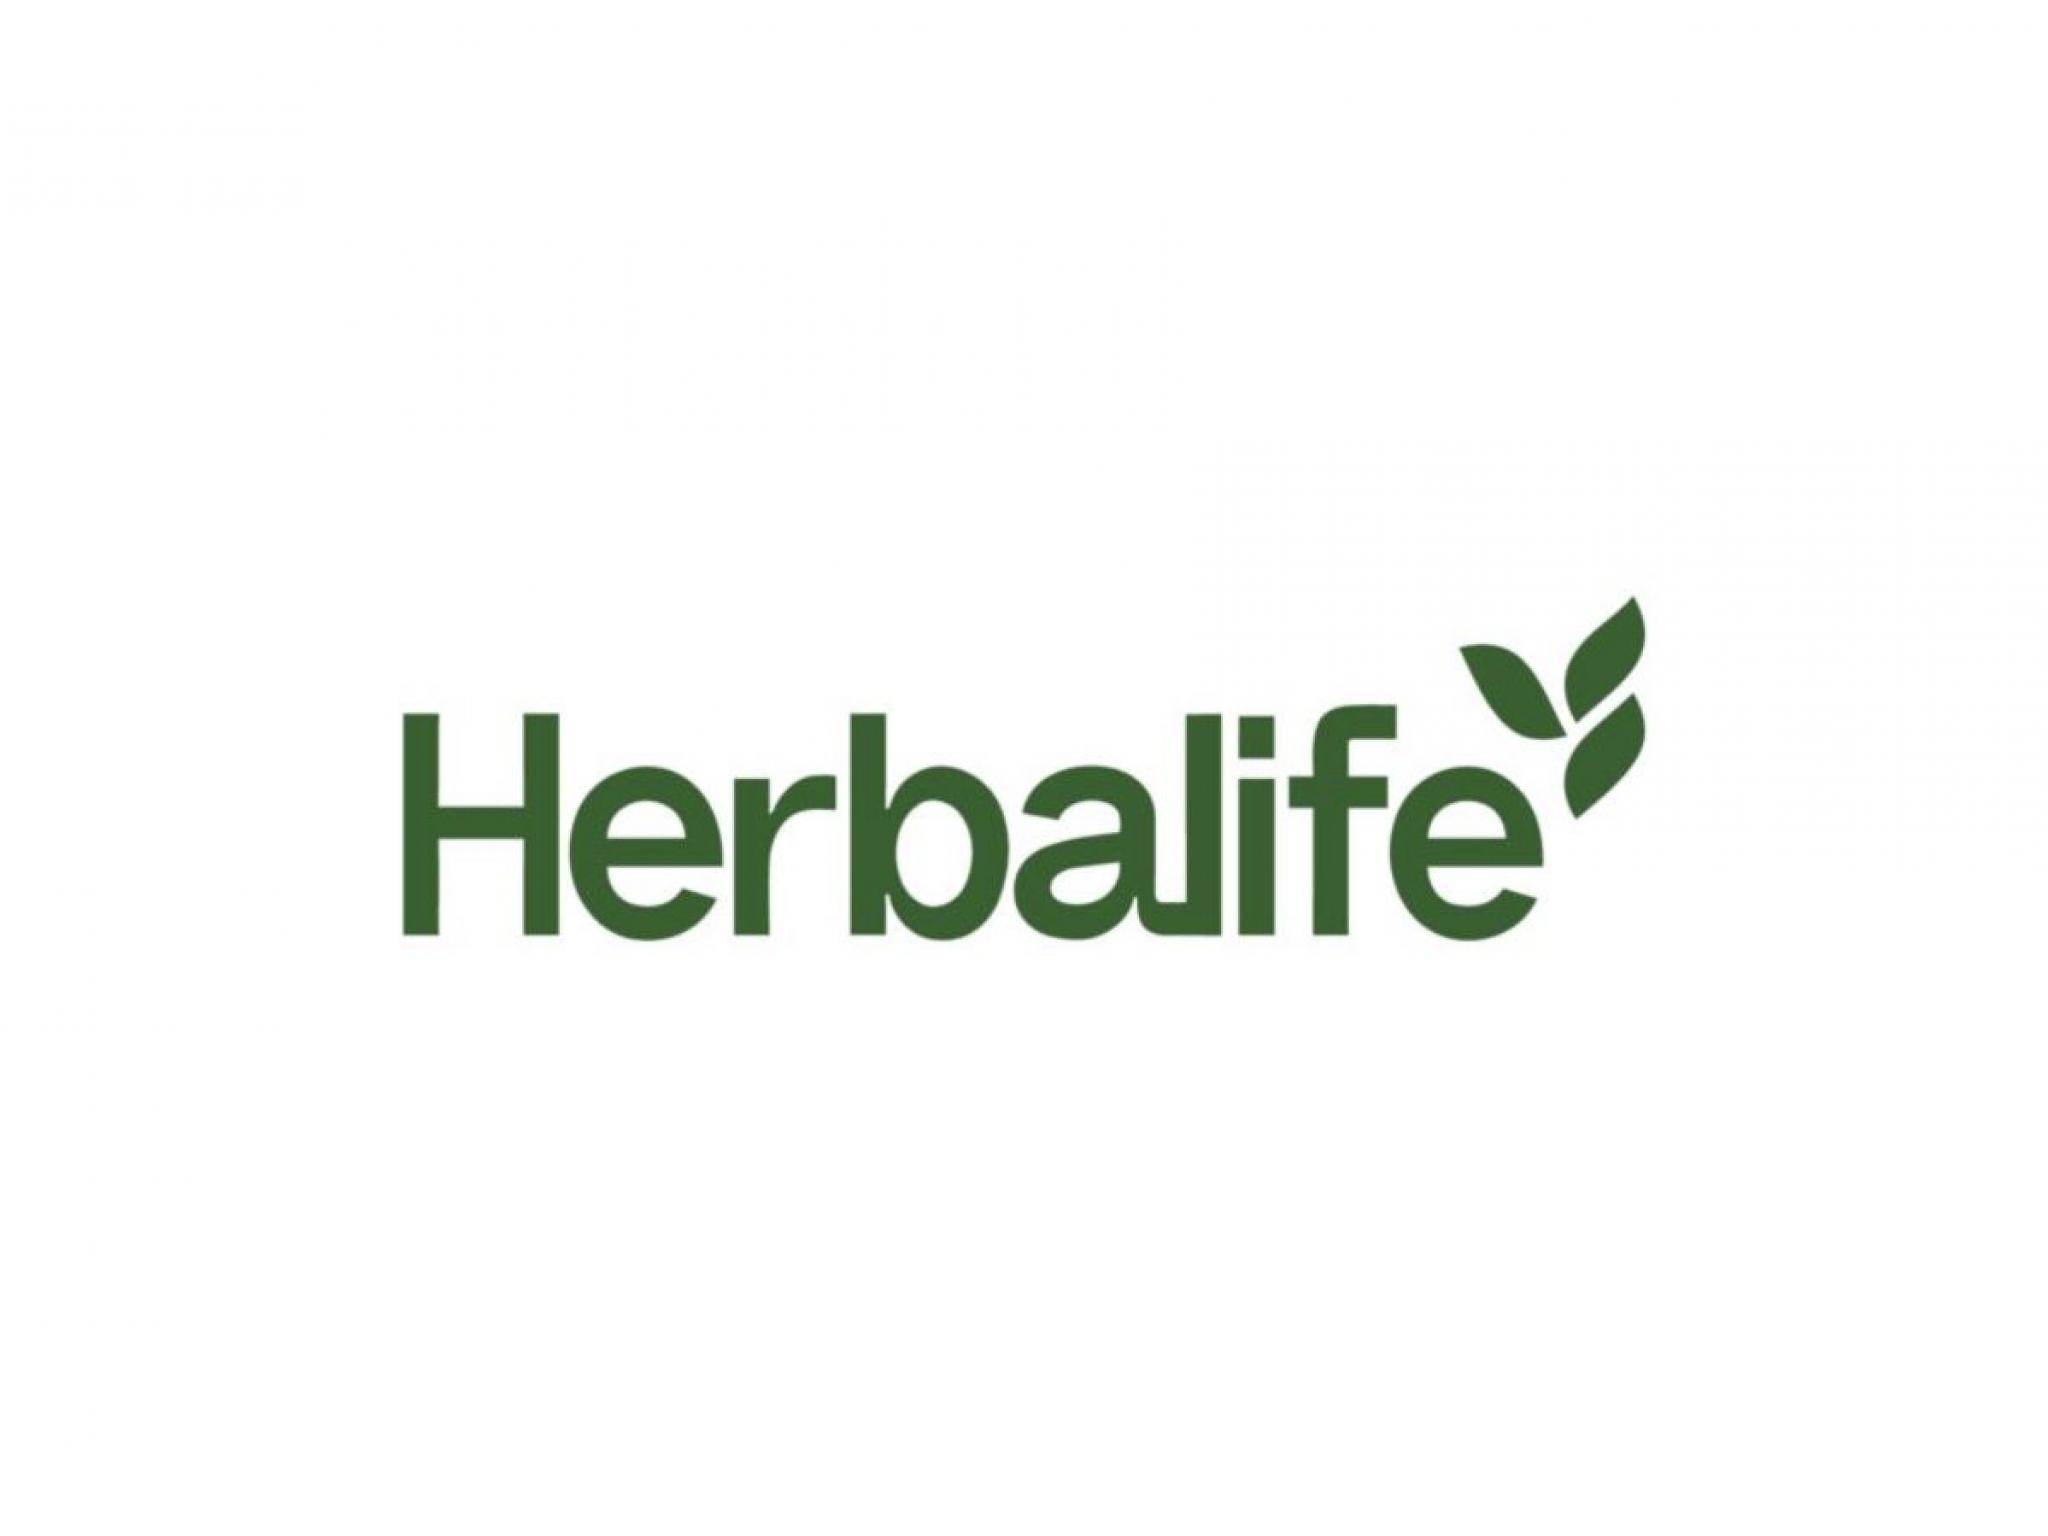  why-herbalife-shares-are-trading-lower-by-around-36-here-are-other-stocks-moving-in-thursdays-mid-day-session 